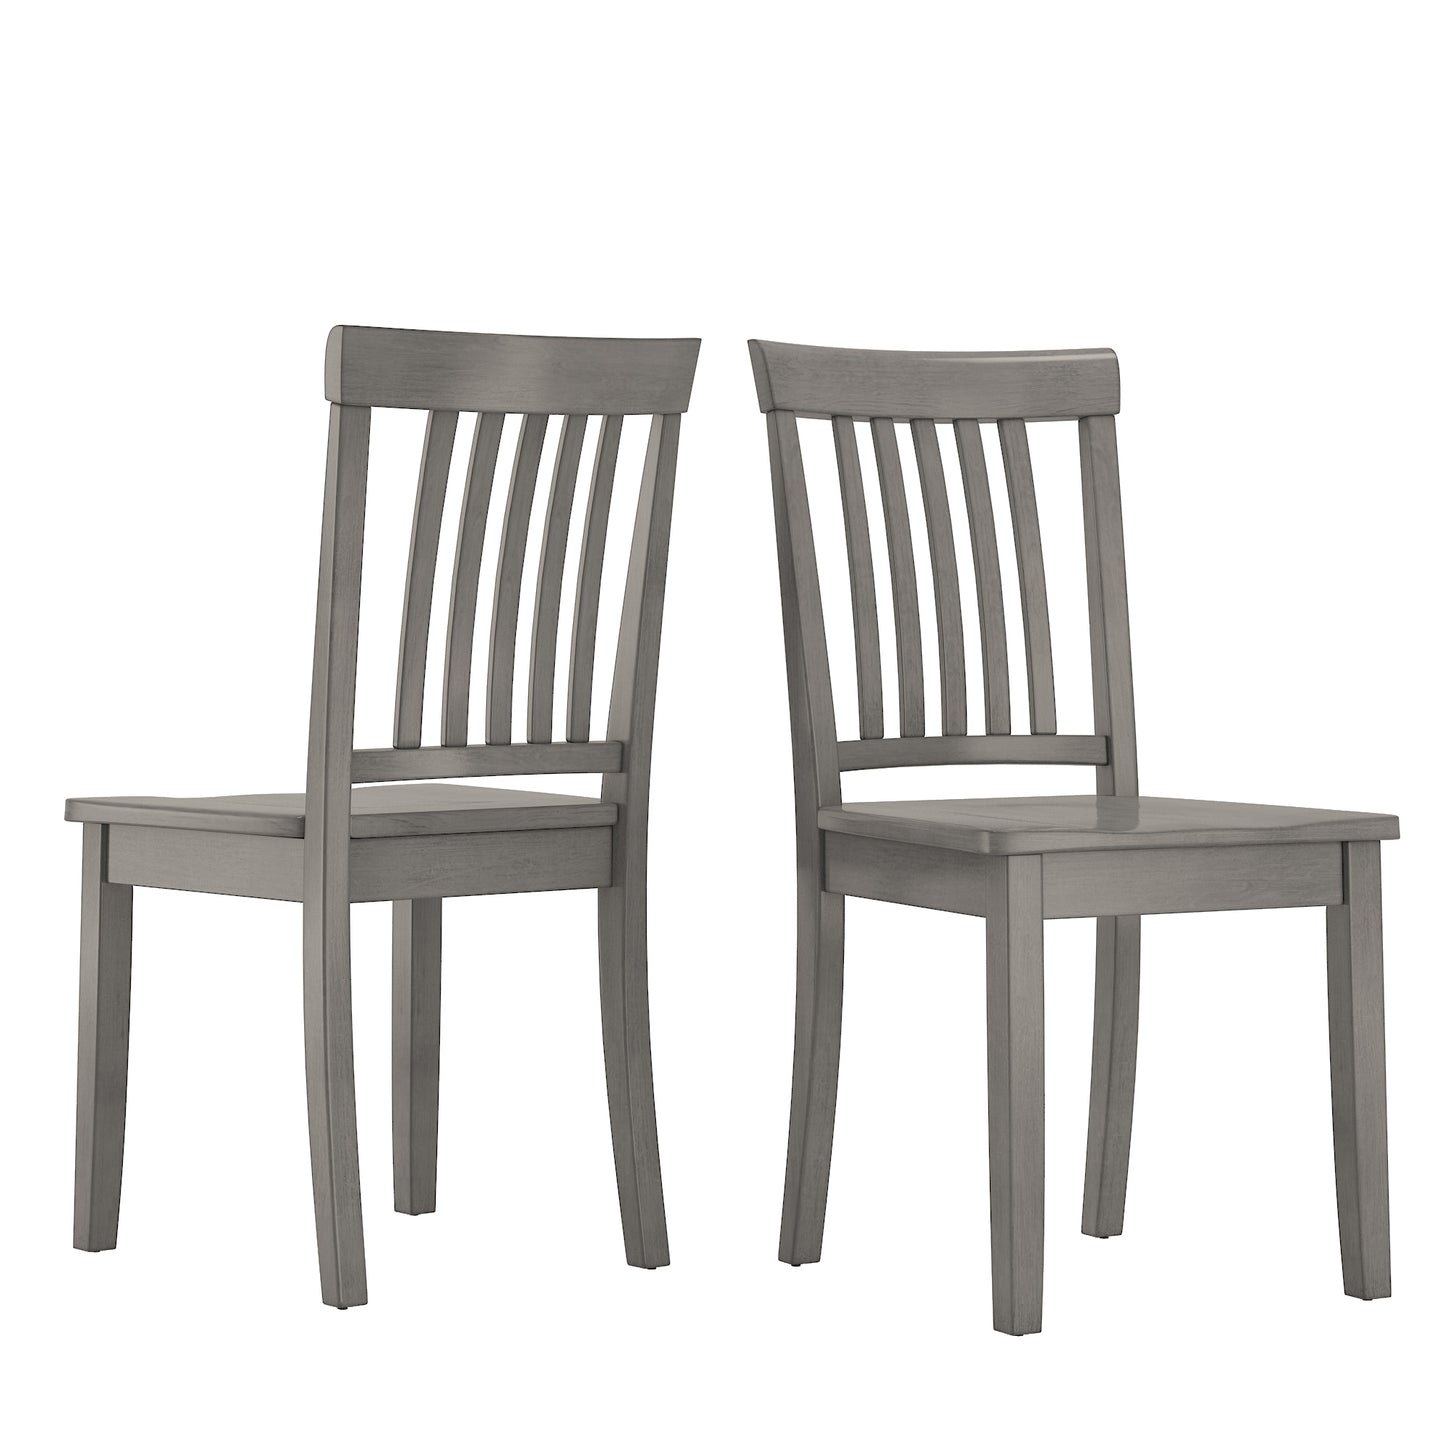 Mission Back Wood Dining Chairs (Set of 2) - Antique Grey Finish